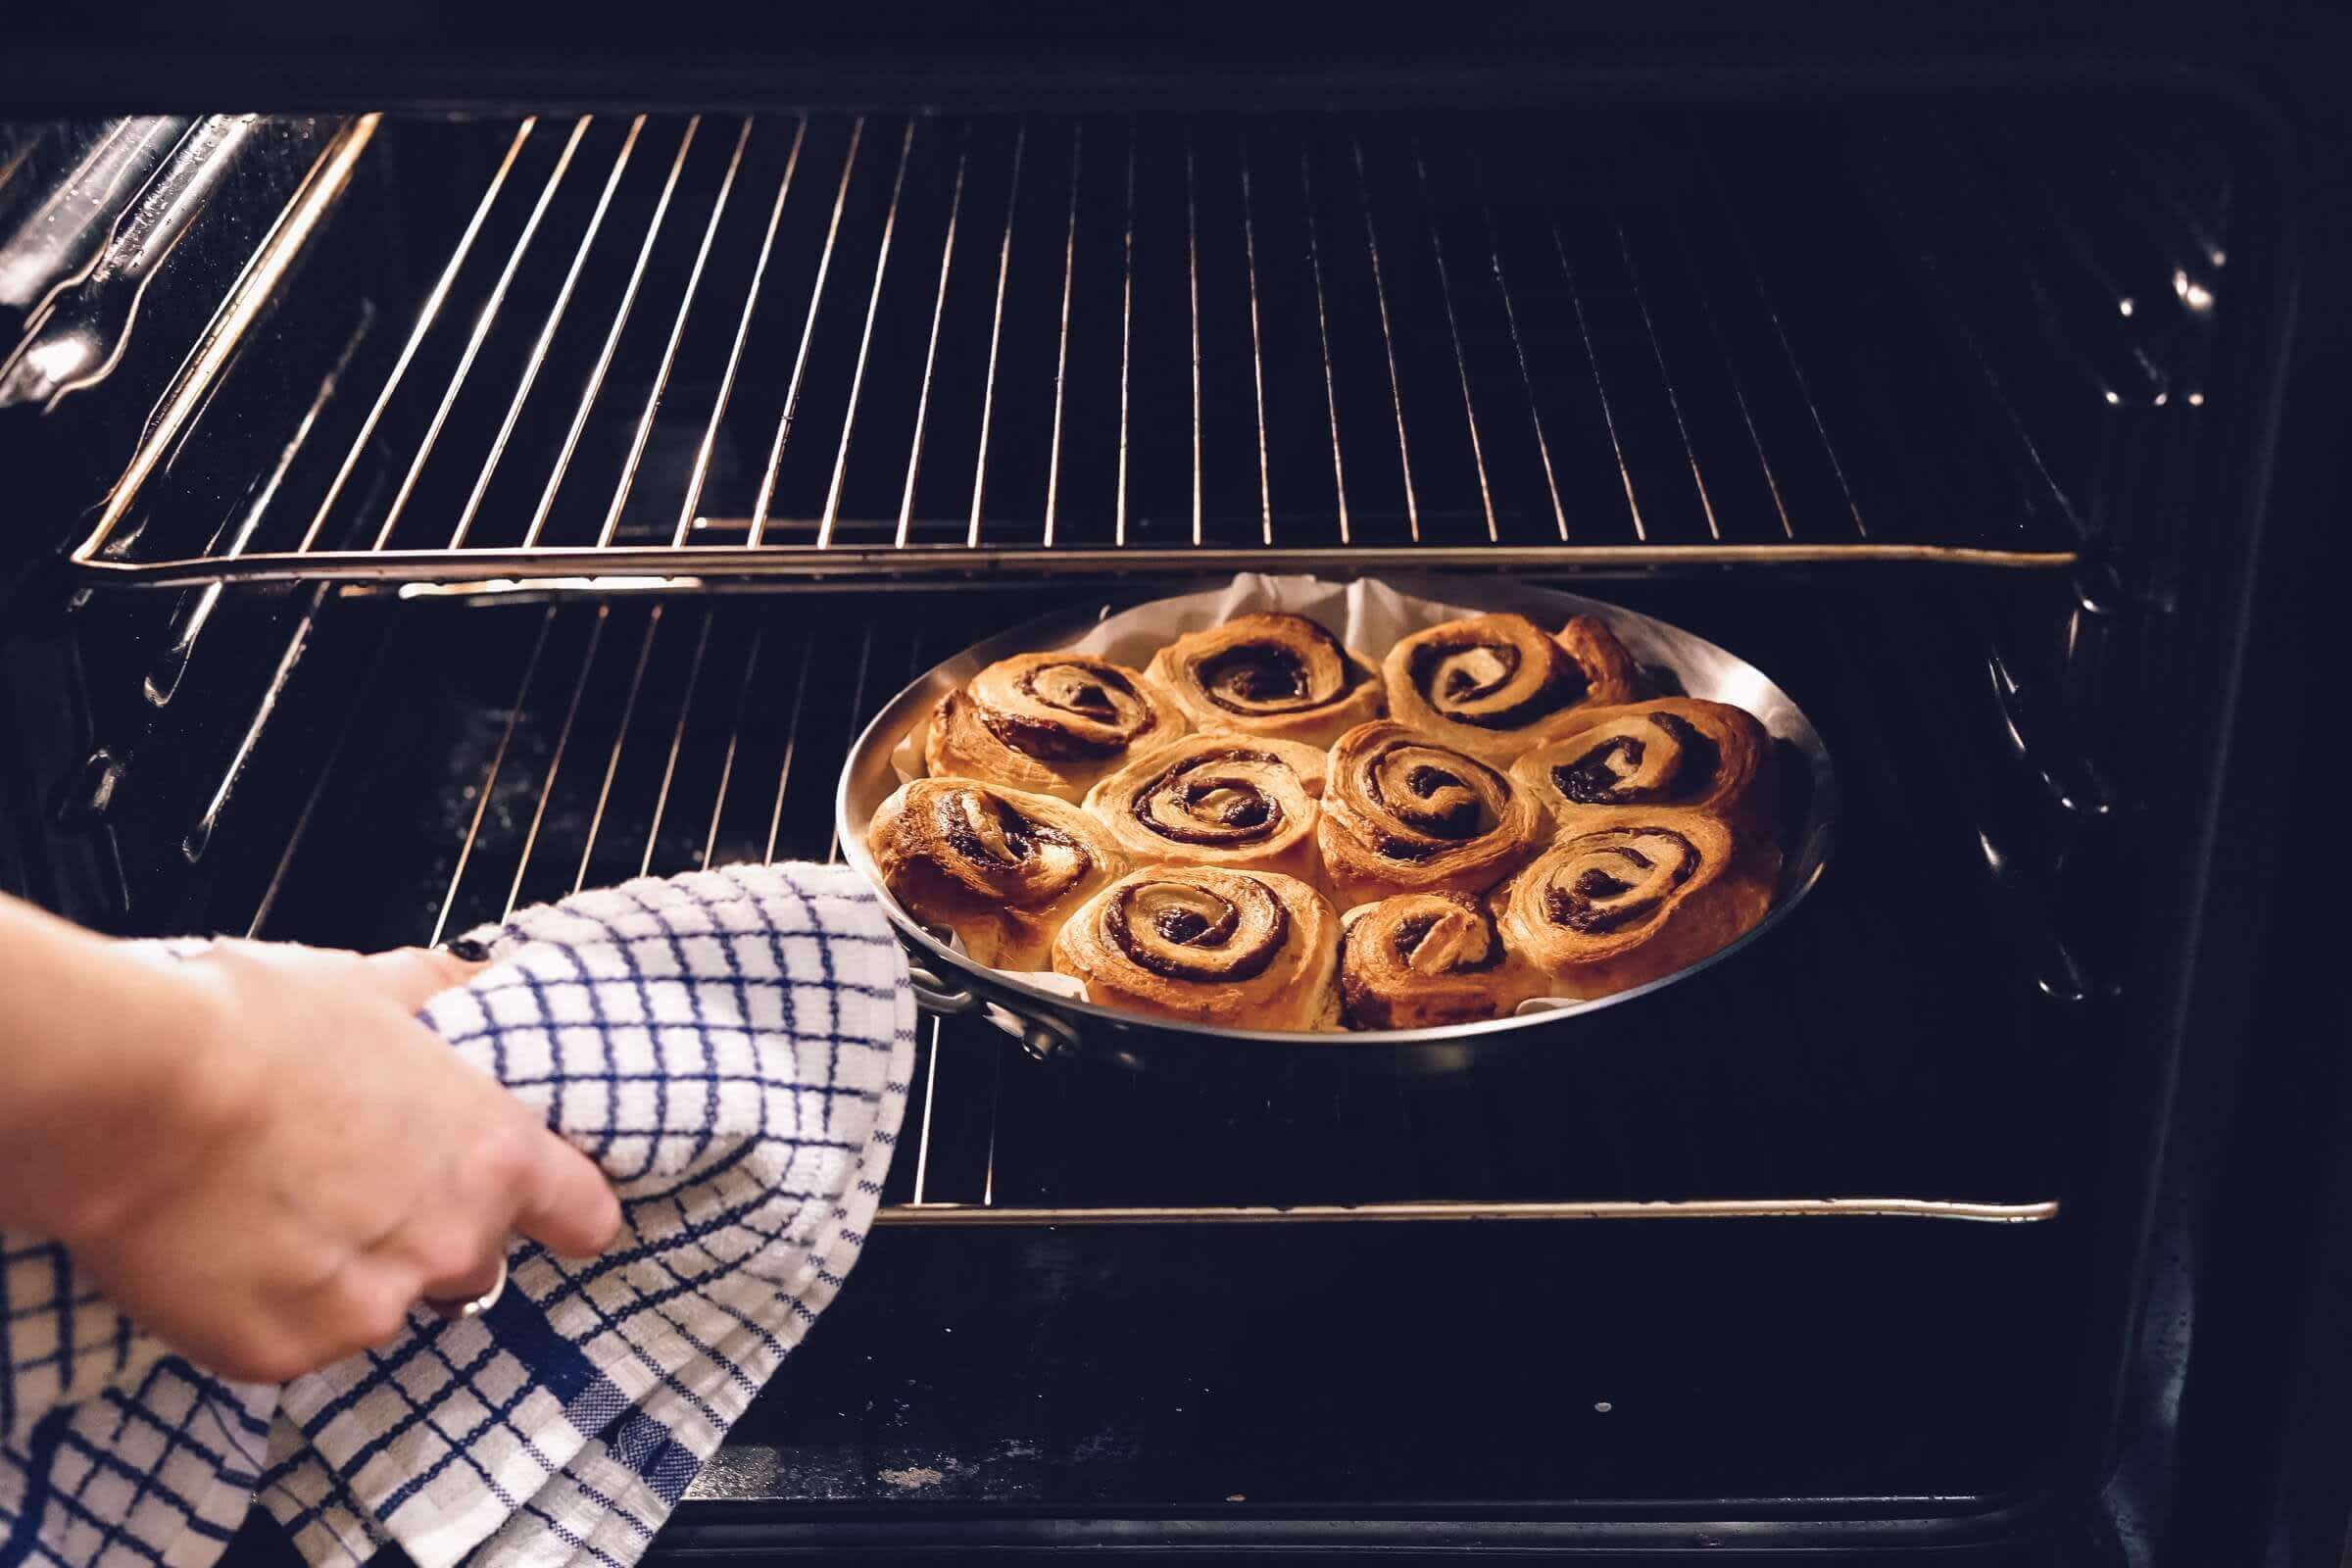 Woman baking crispy pastry dough in oven